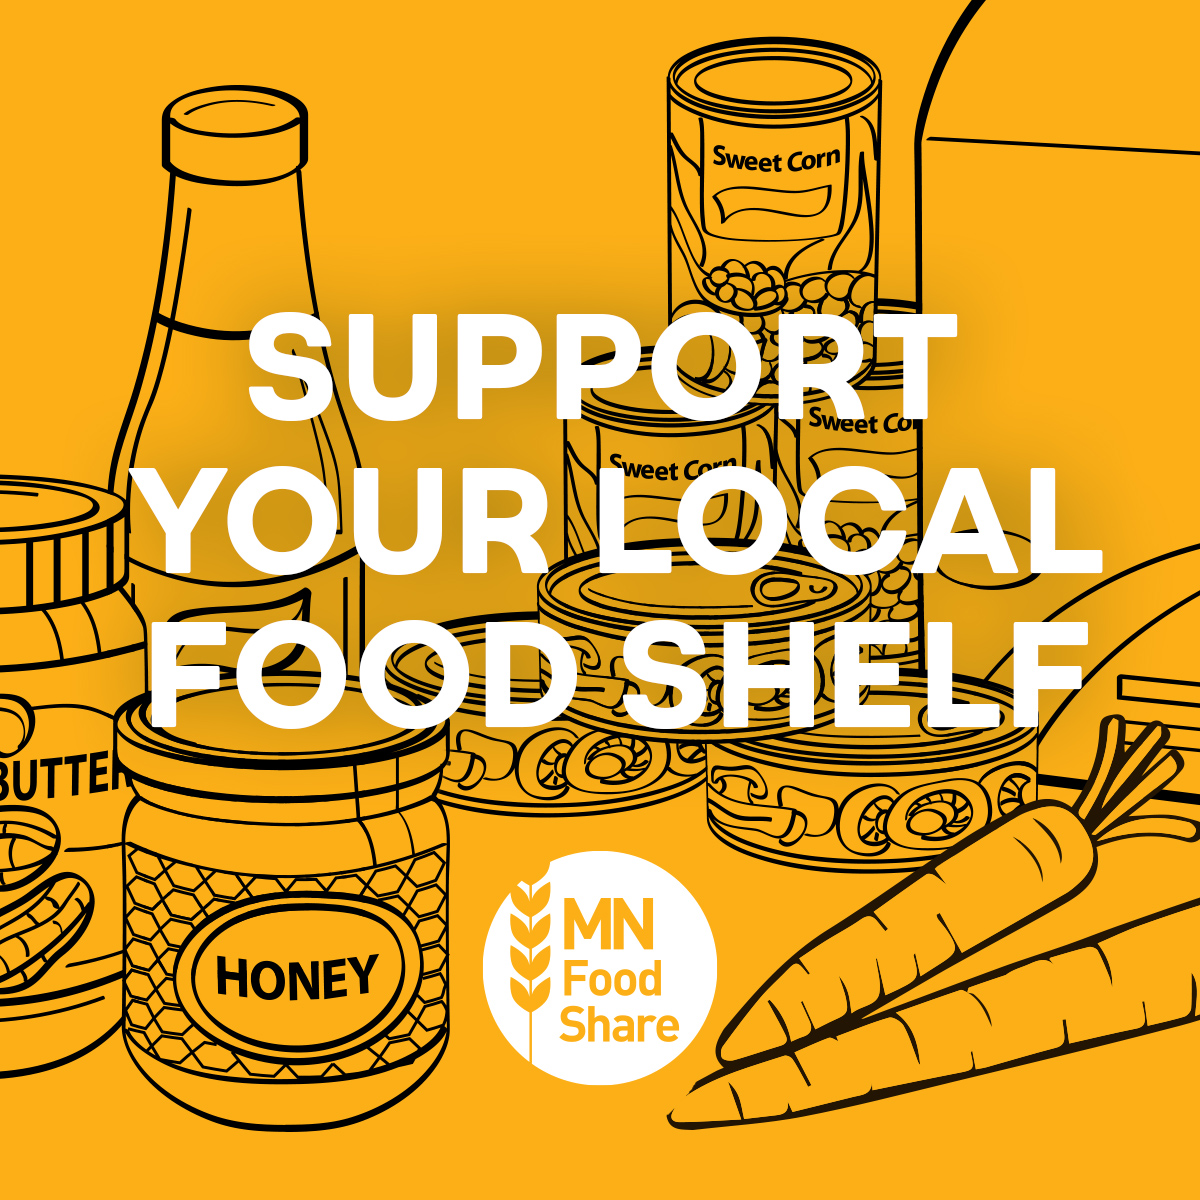 Support your local food shelf